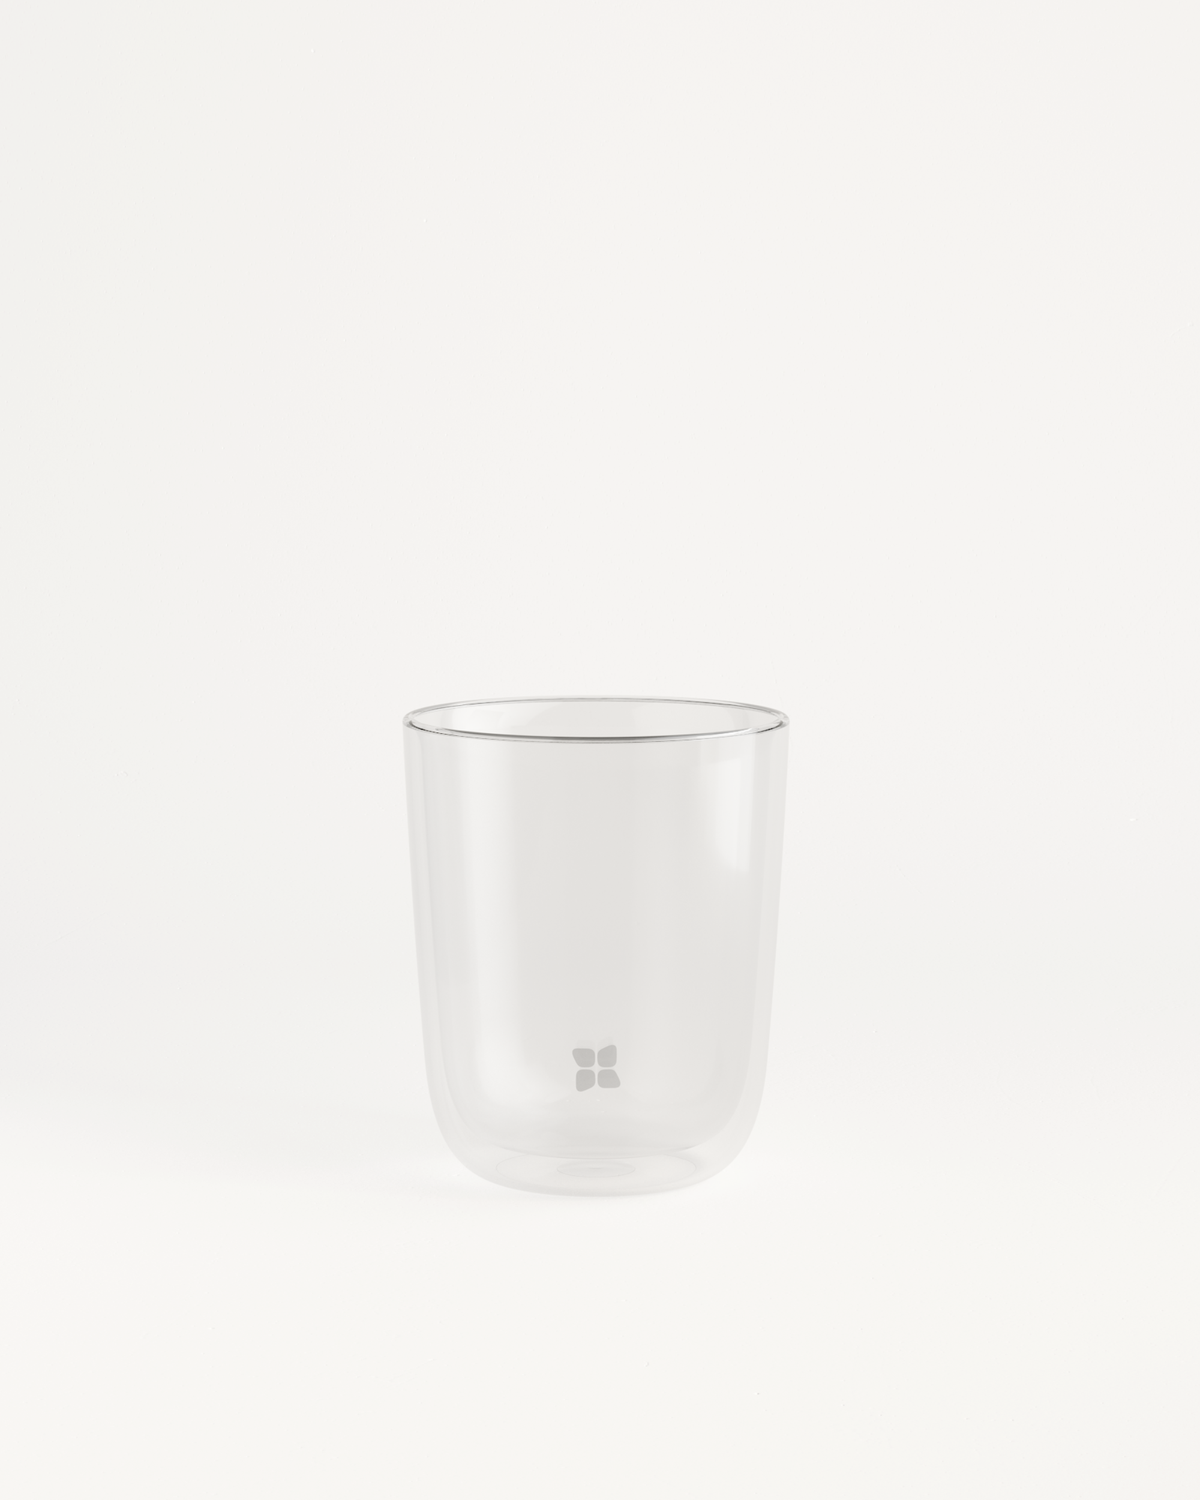 https://cdn.shopify.com/s/files/1/0274/4988/4706/products/waterdrop-double-walled-glasses-transparent_1200x.png?v=1701965540